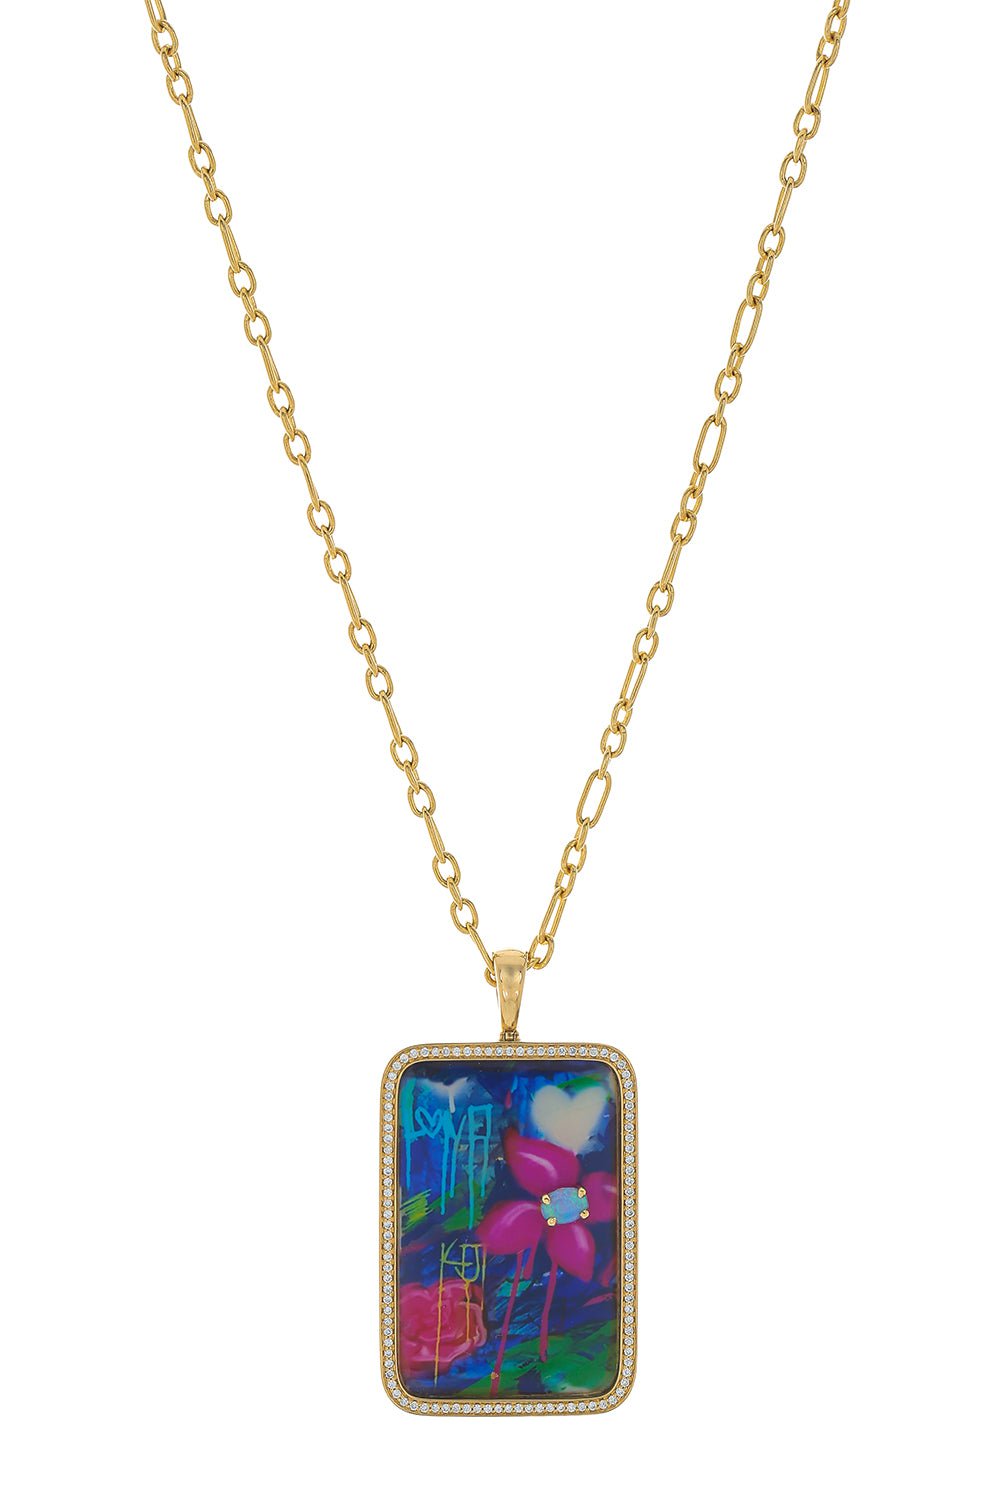 KATHERINE JETTER-Dog Tag Necklace-YELLOW GOLD